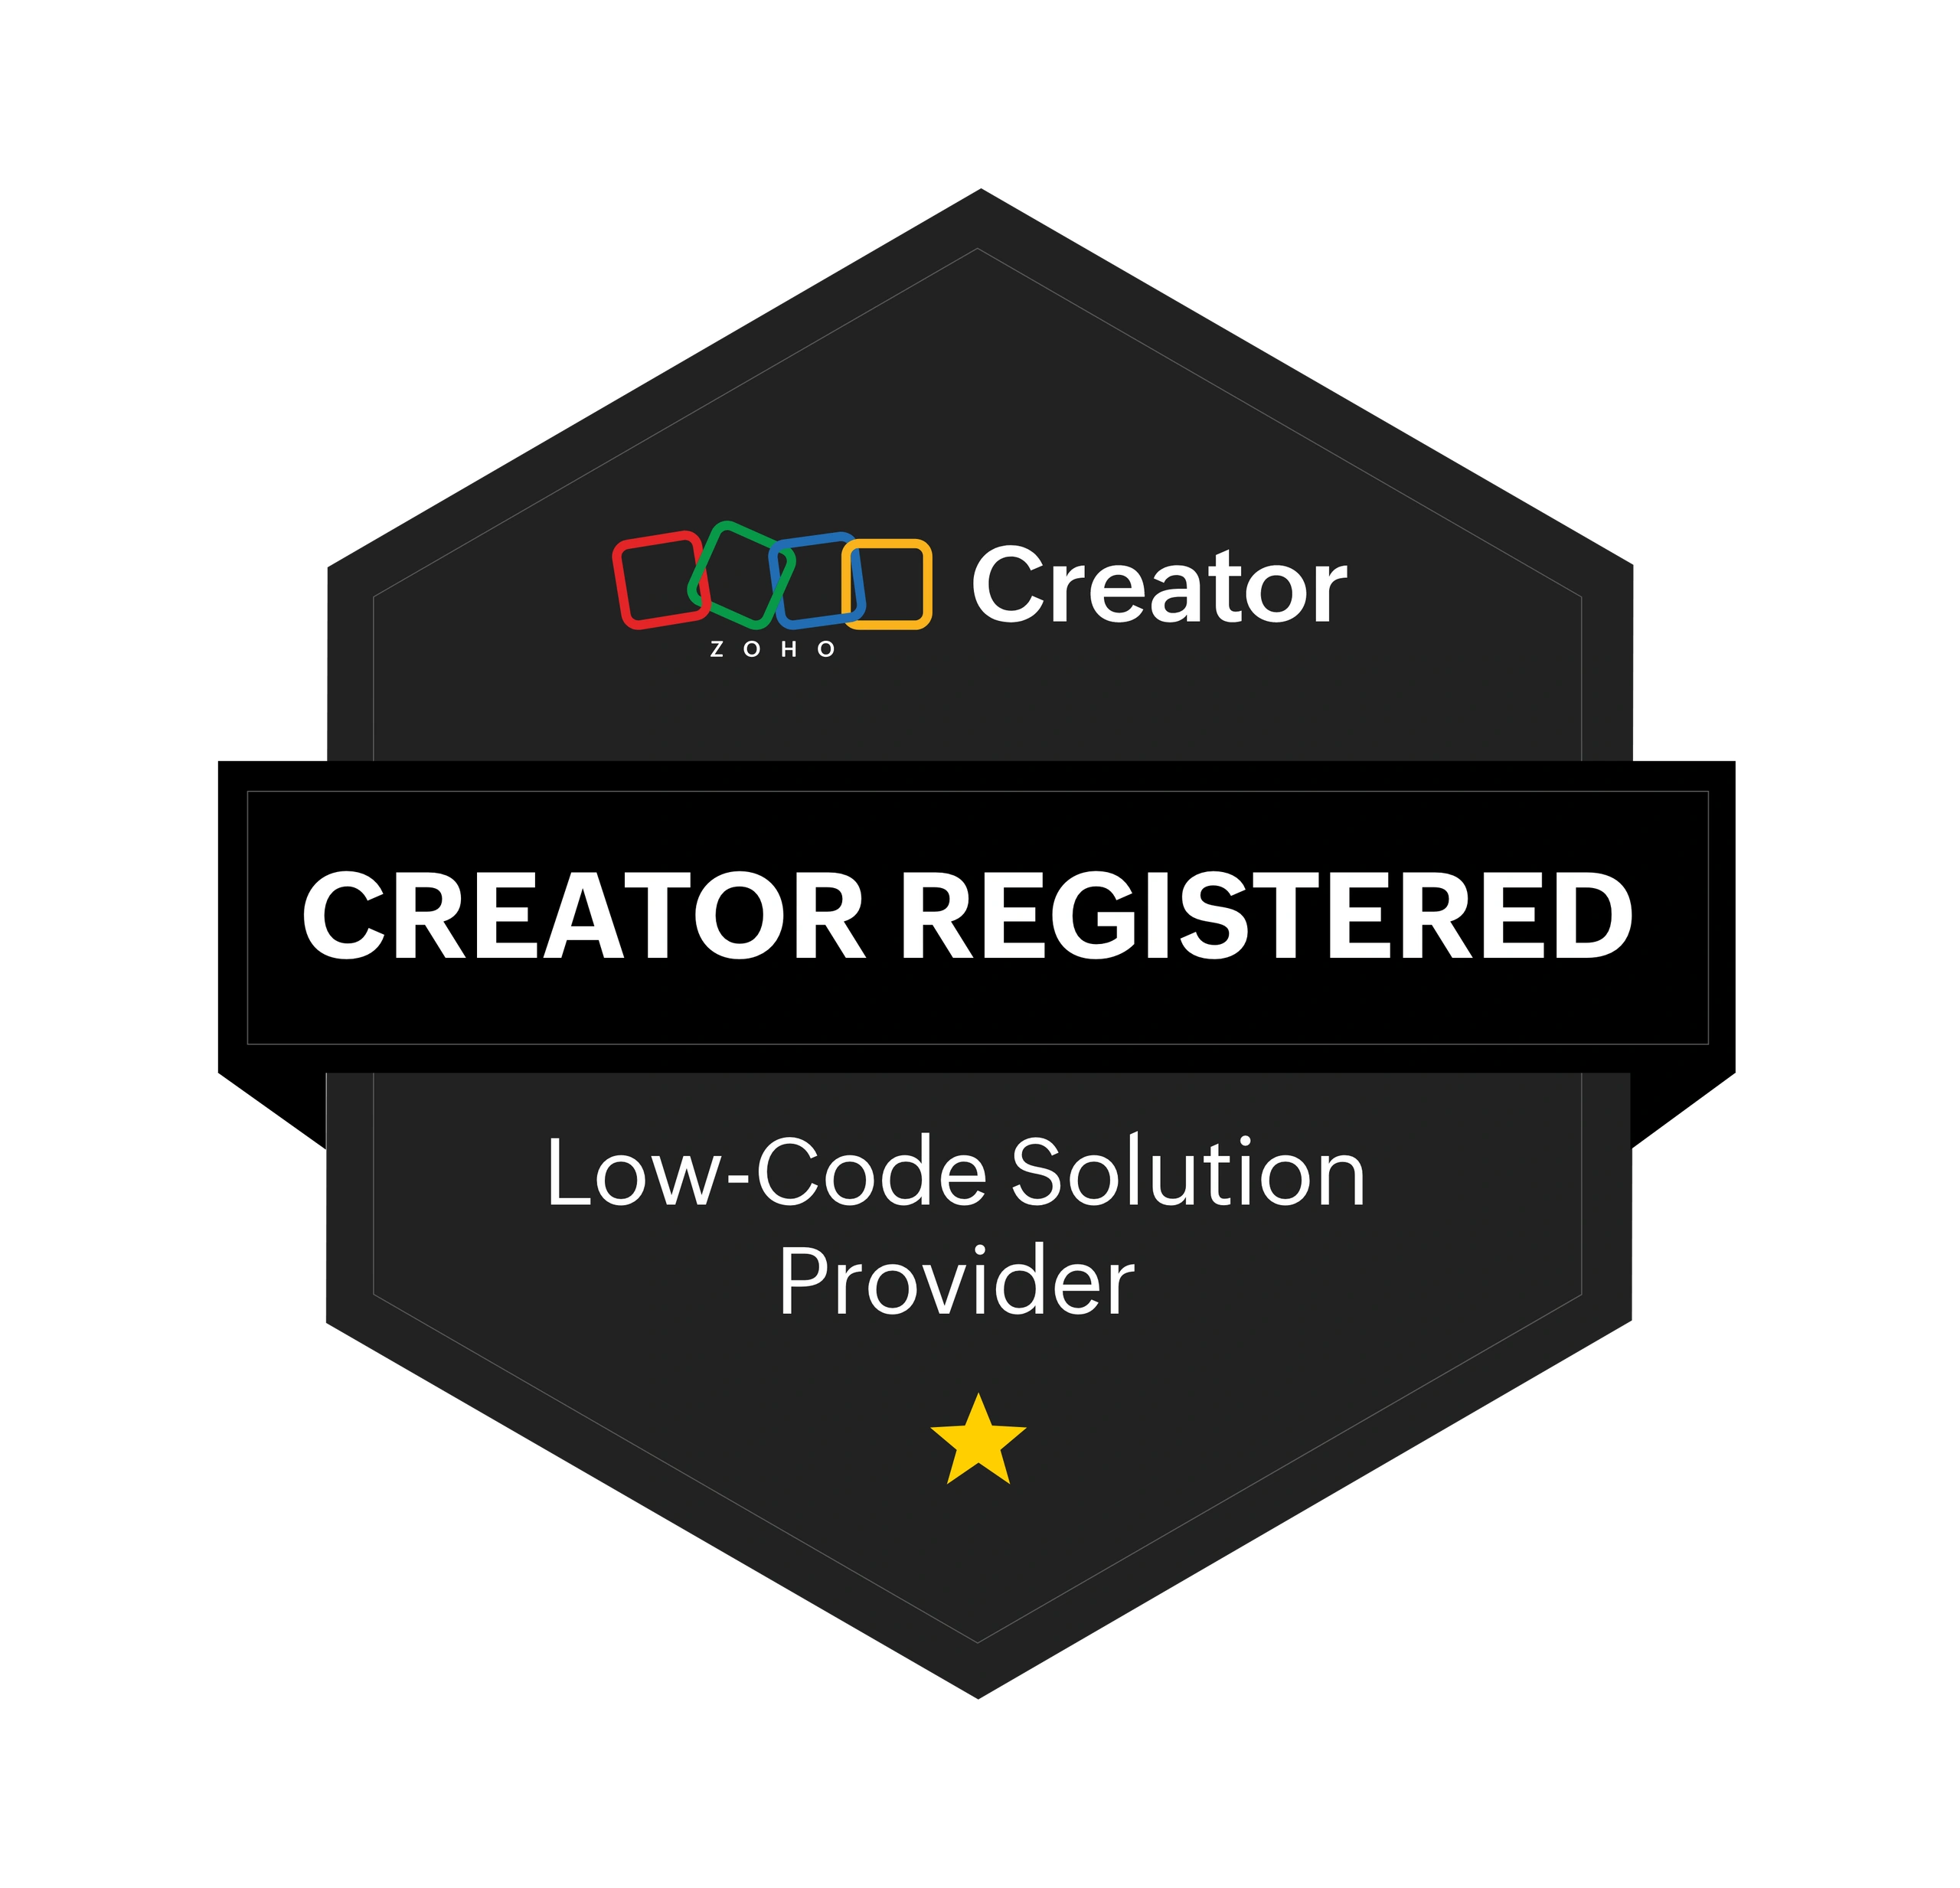 Zoho Creator Registered Low-Code Solution Provider.